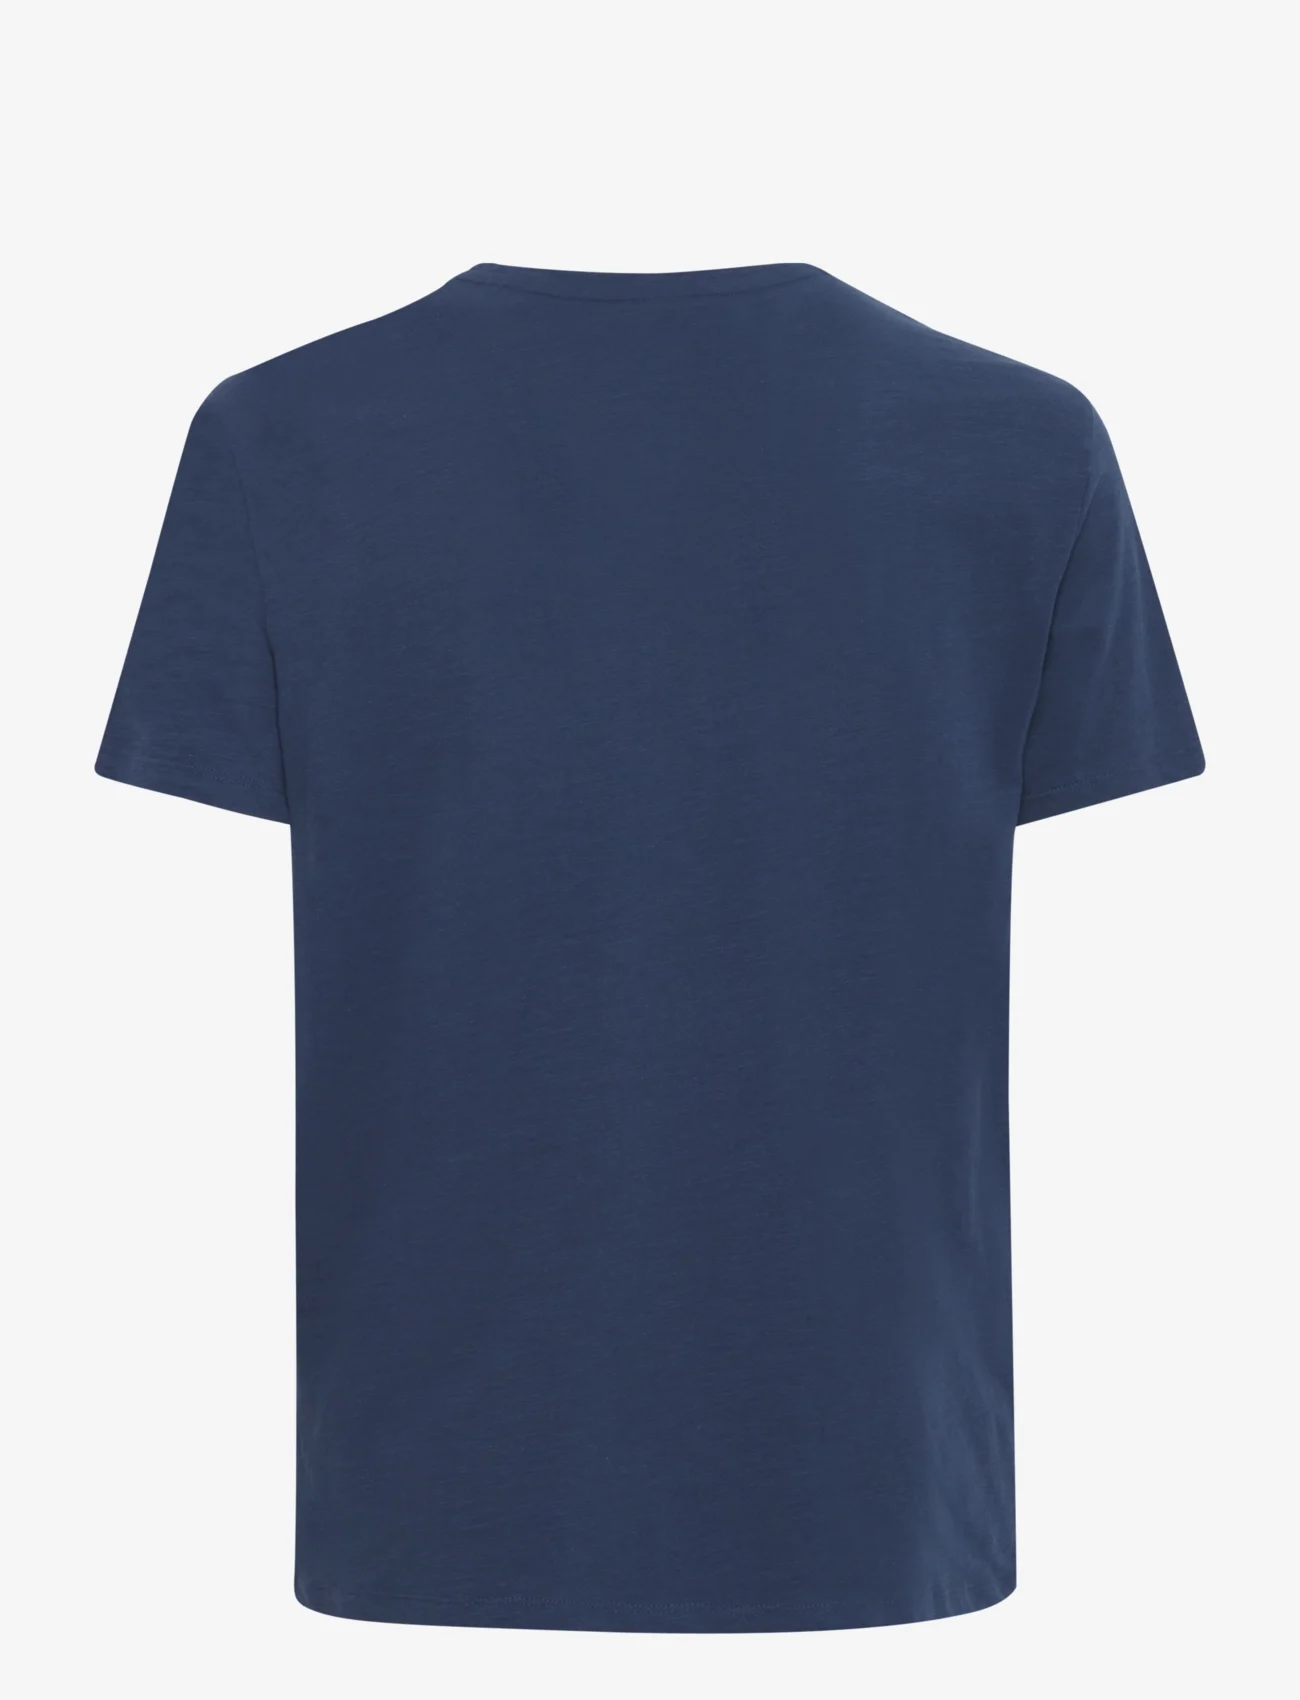 Blend - Tee - lowest prices - dress blues - 1